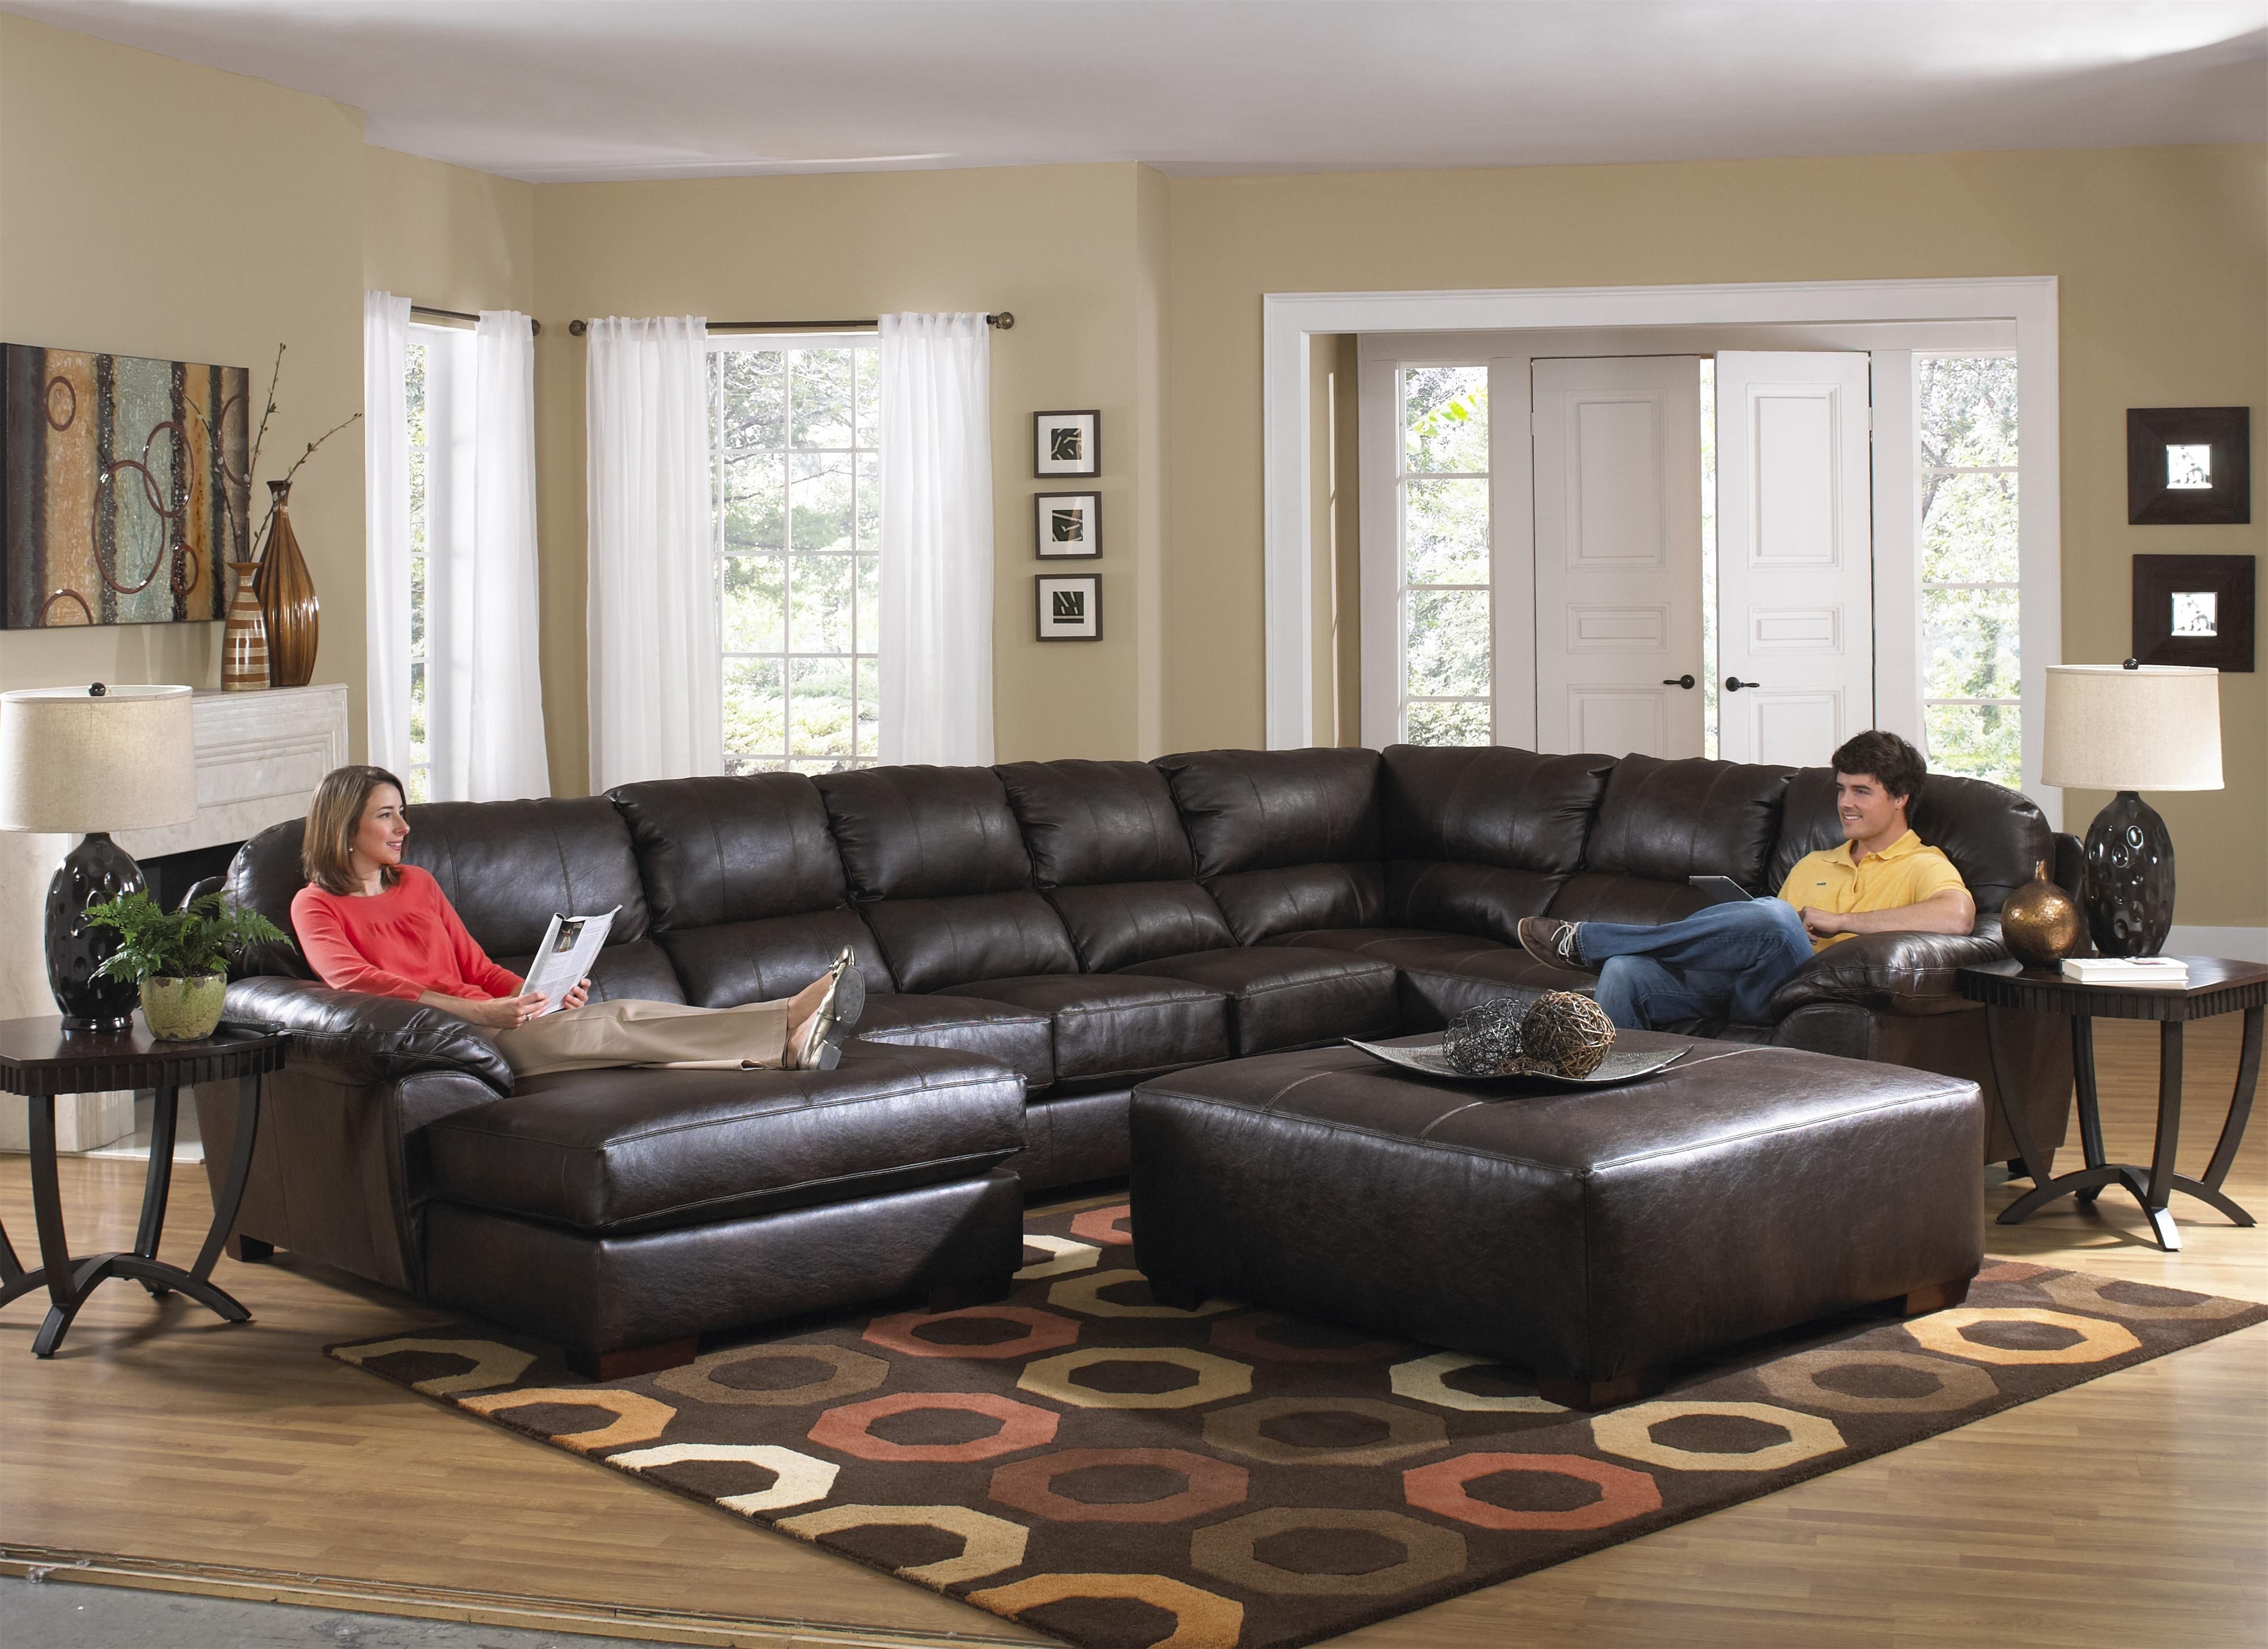 Large Sectional Sofa With Ottoman (View 10 of 20)